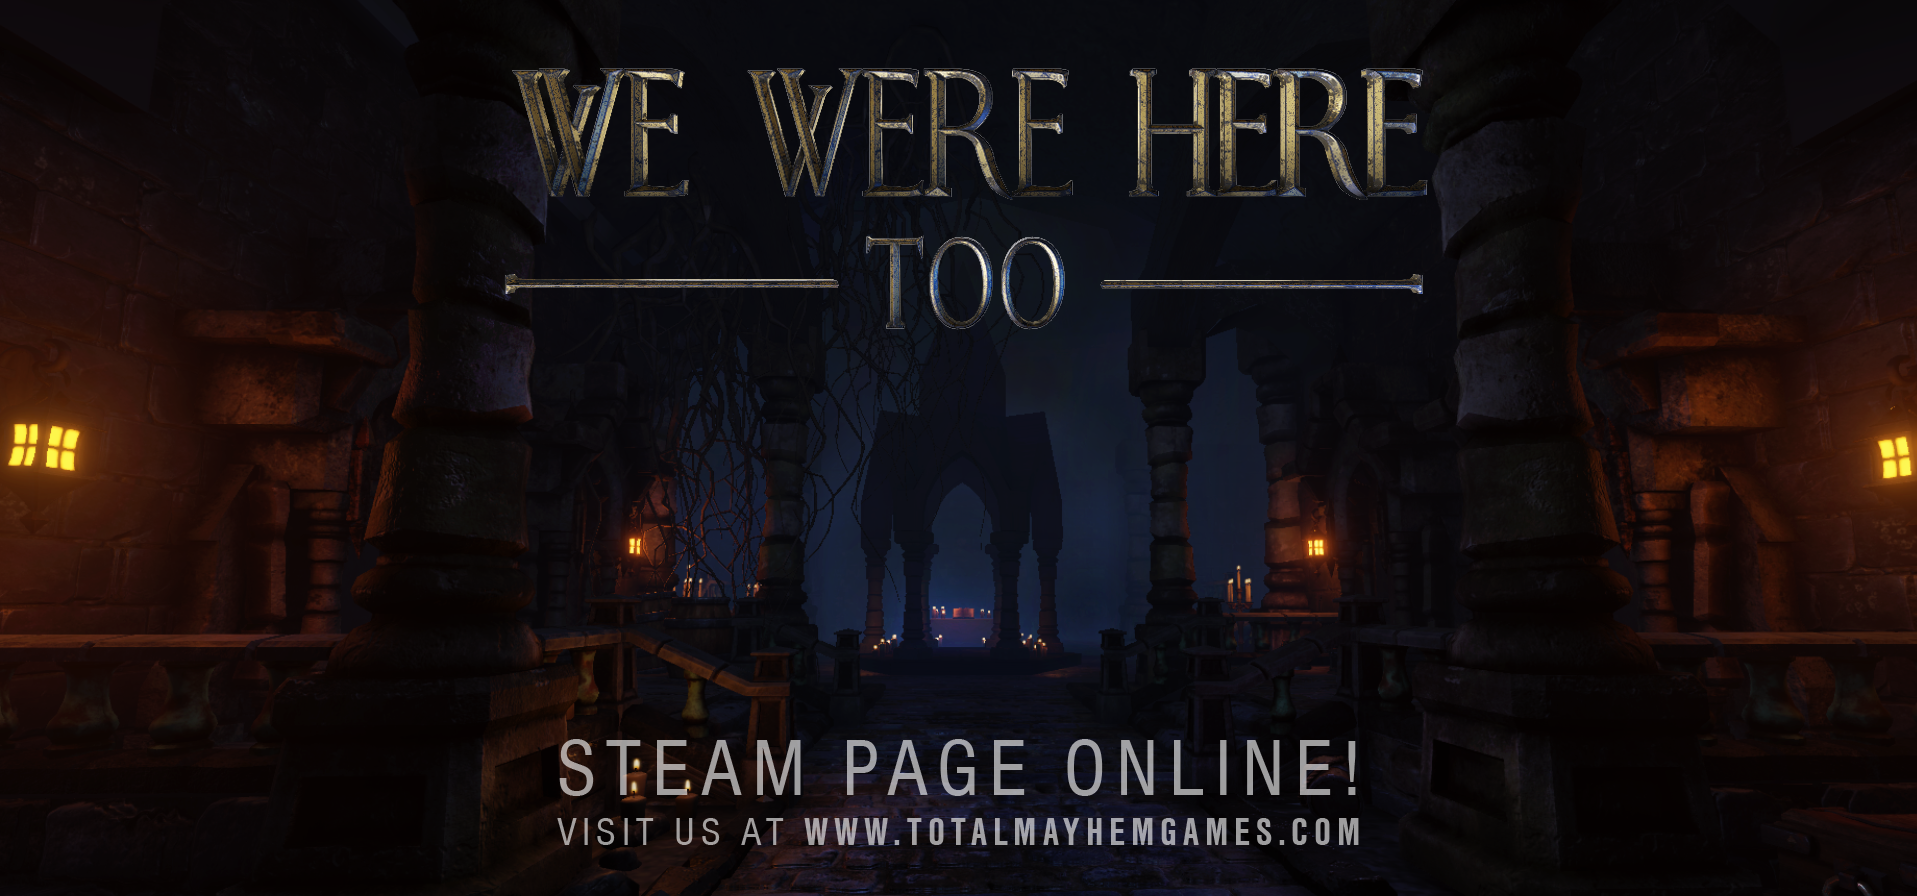 download free we were here too steam